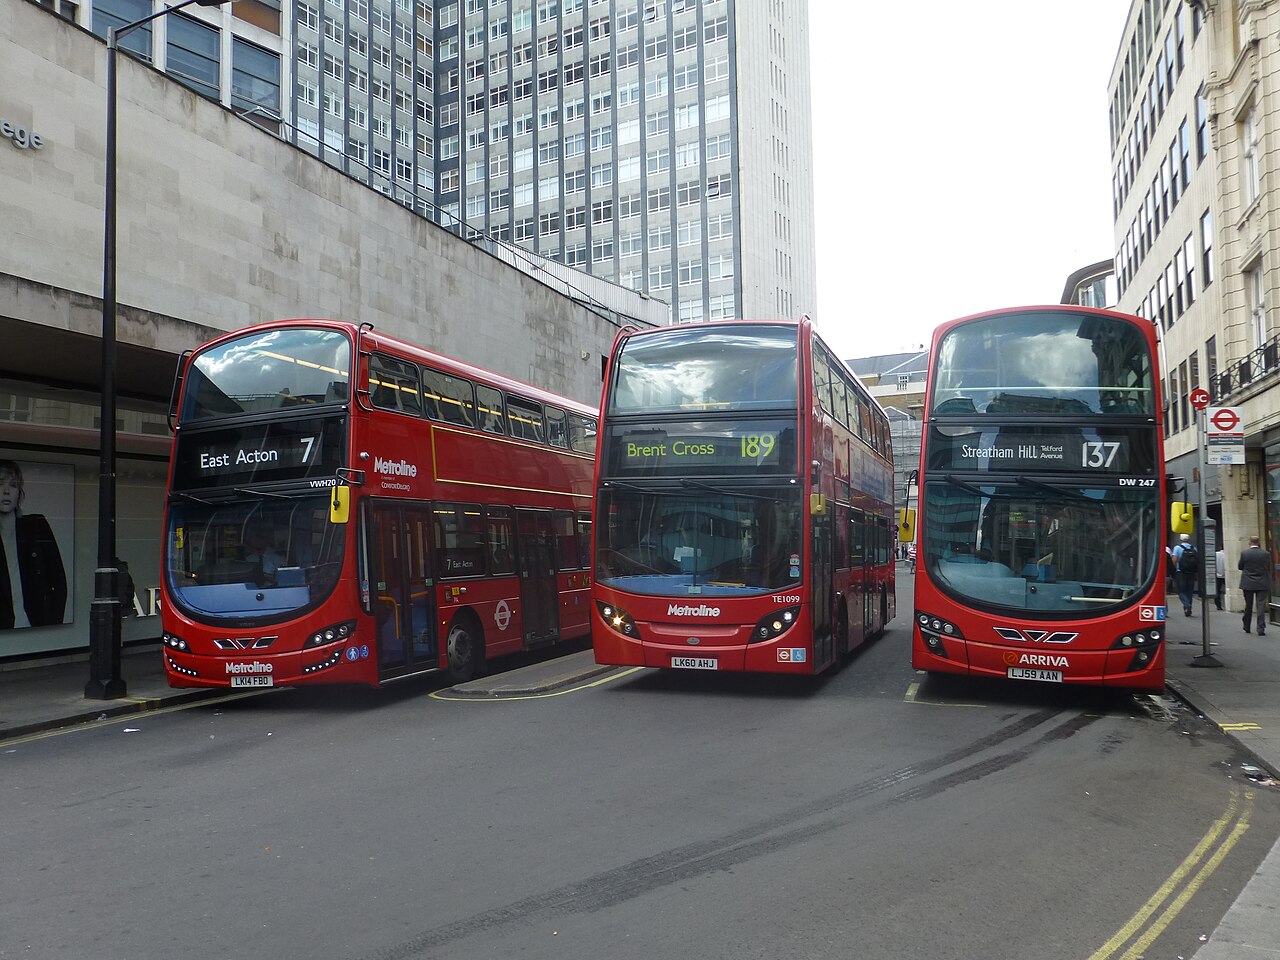 File:TFL bus route 7, 189 and 137 on John Prince's Street ...